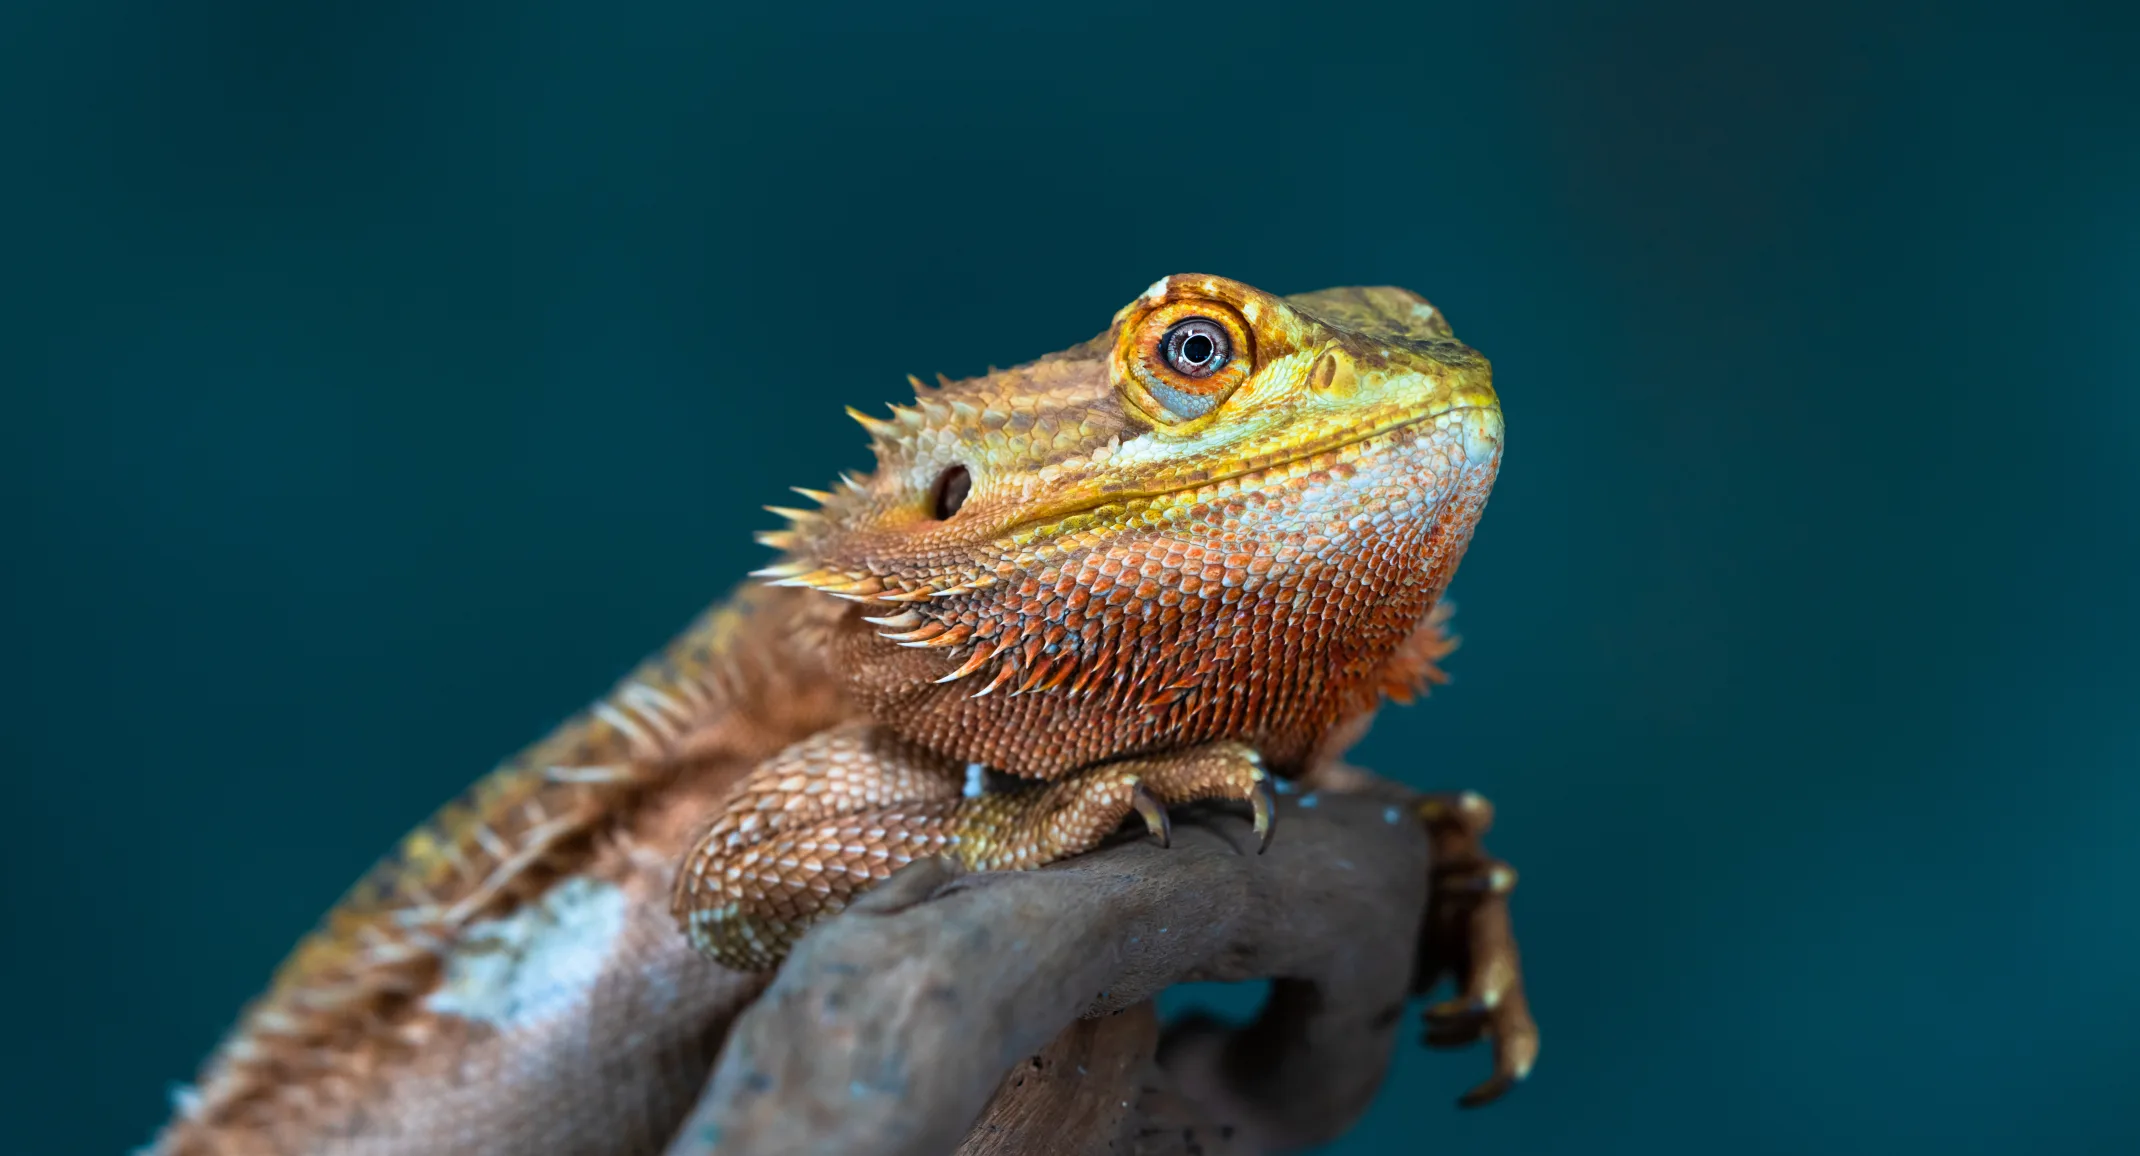 A lizard sits and stares. A blue background is behind the reptile